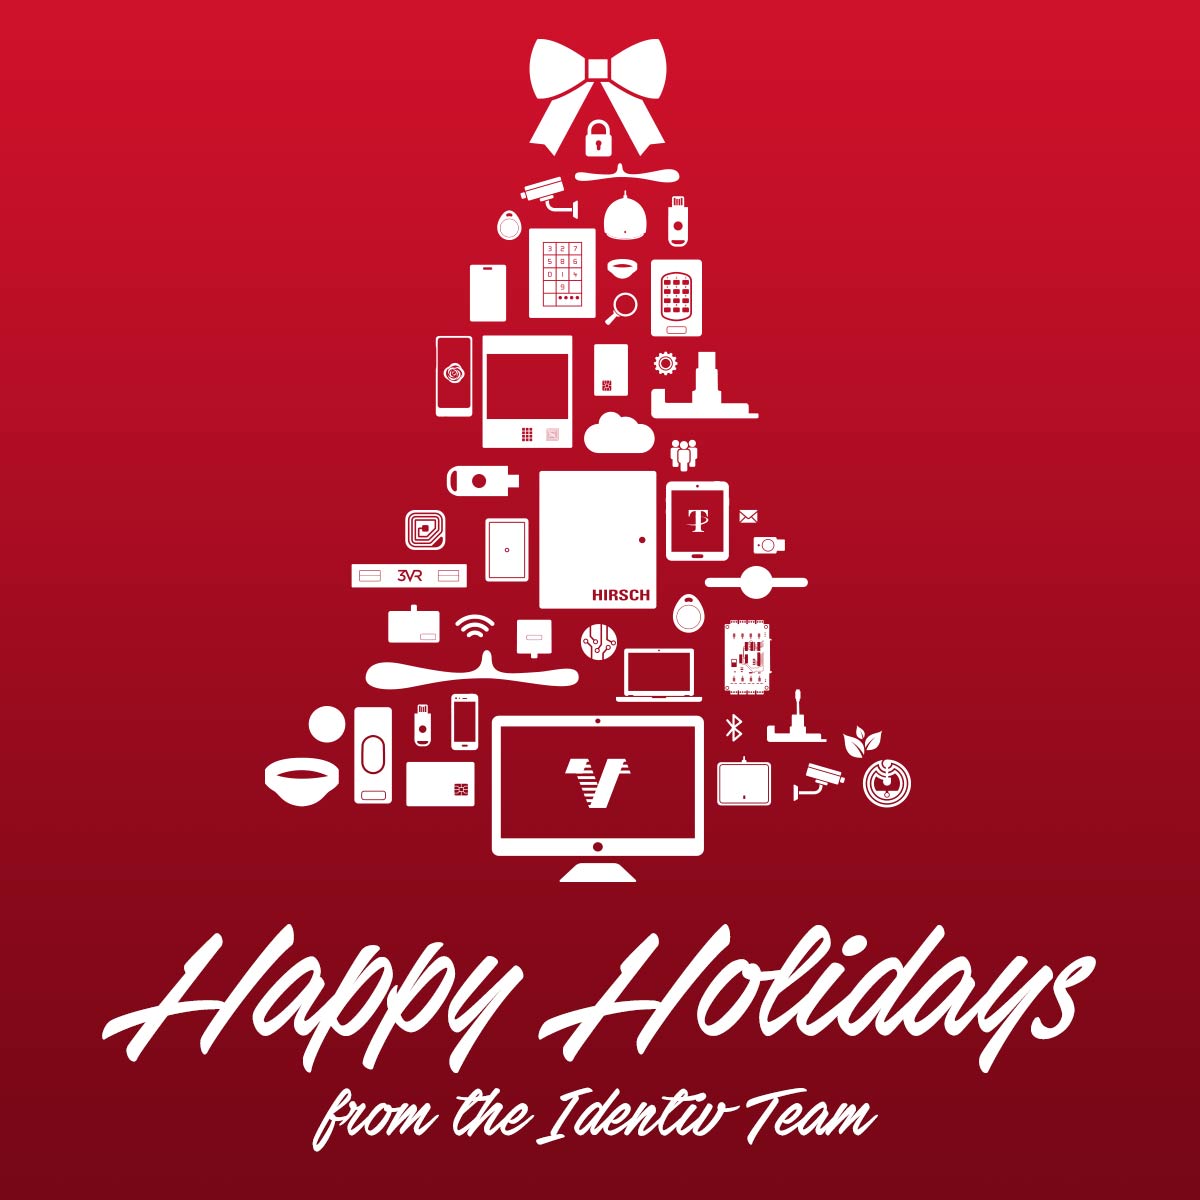 Happy Holidays from Identiv - card with tree made from Identiv products